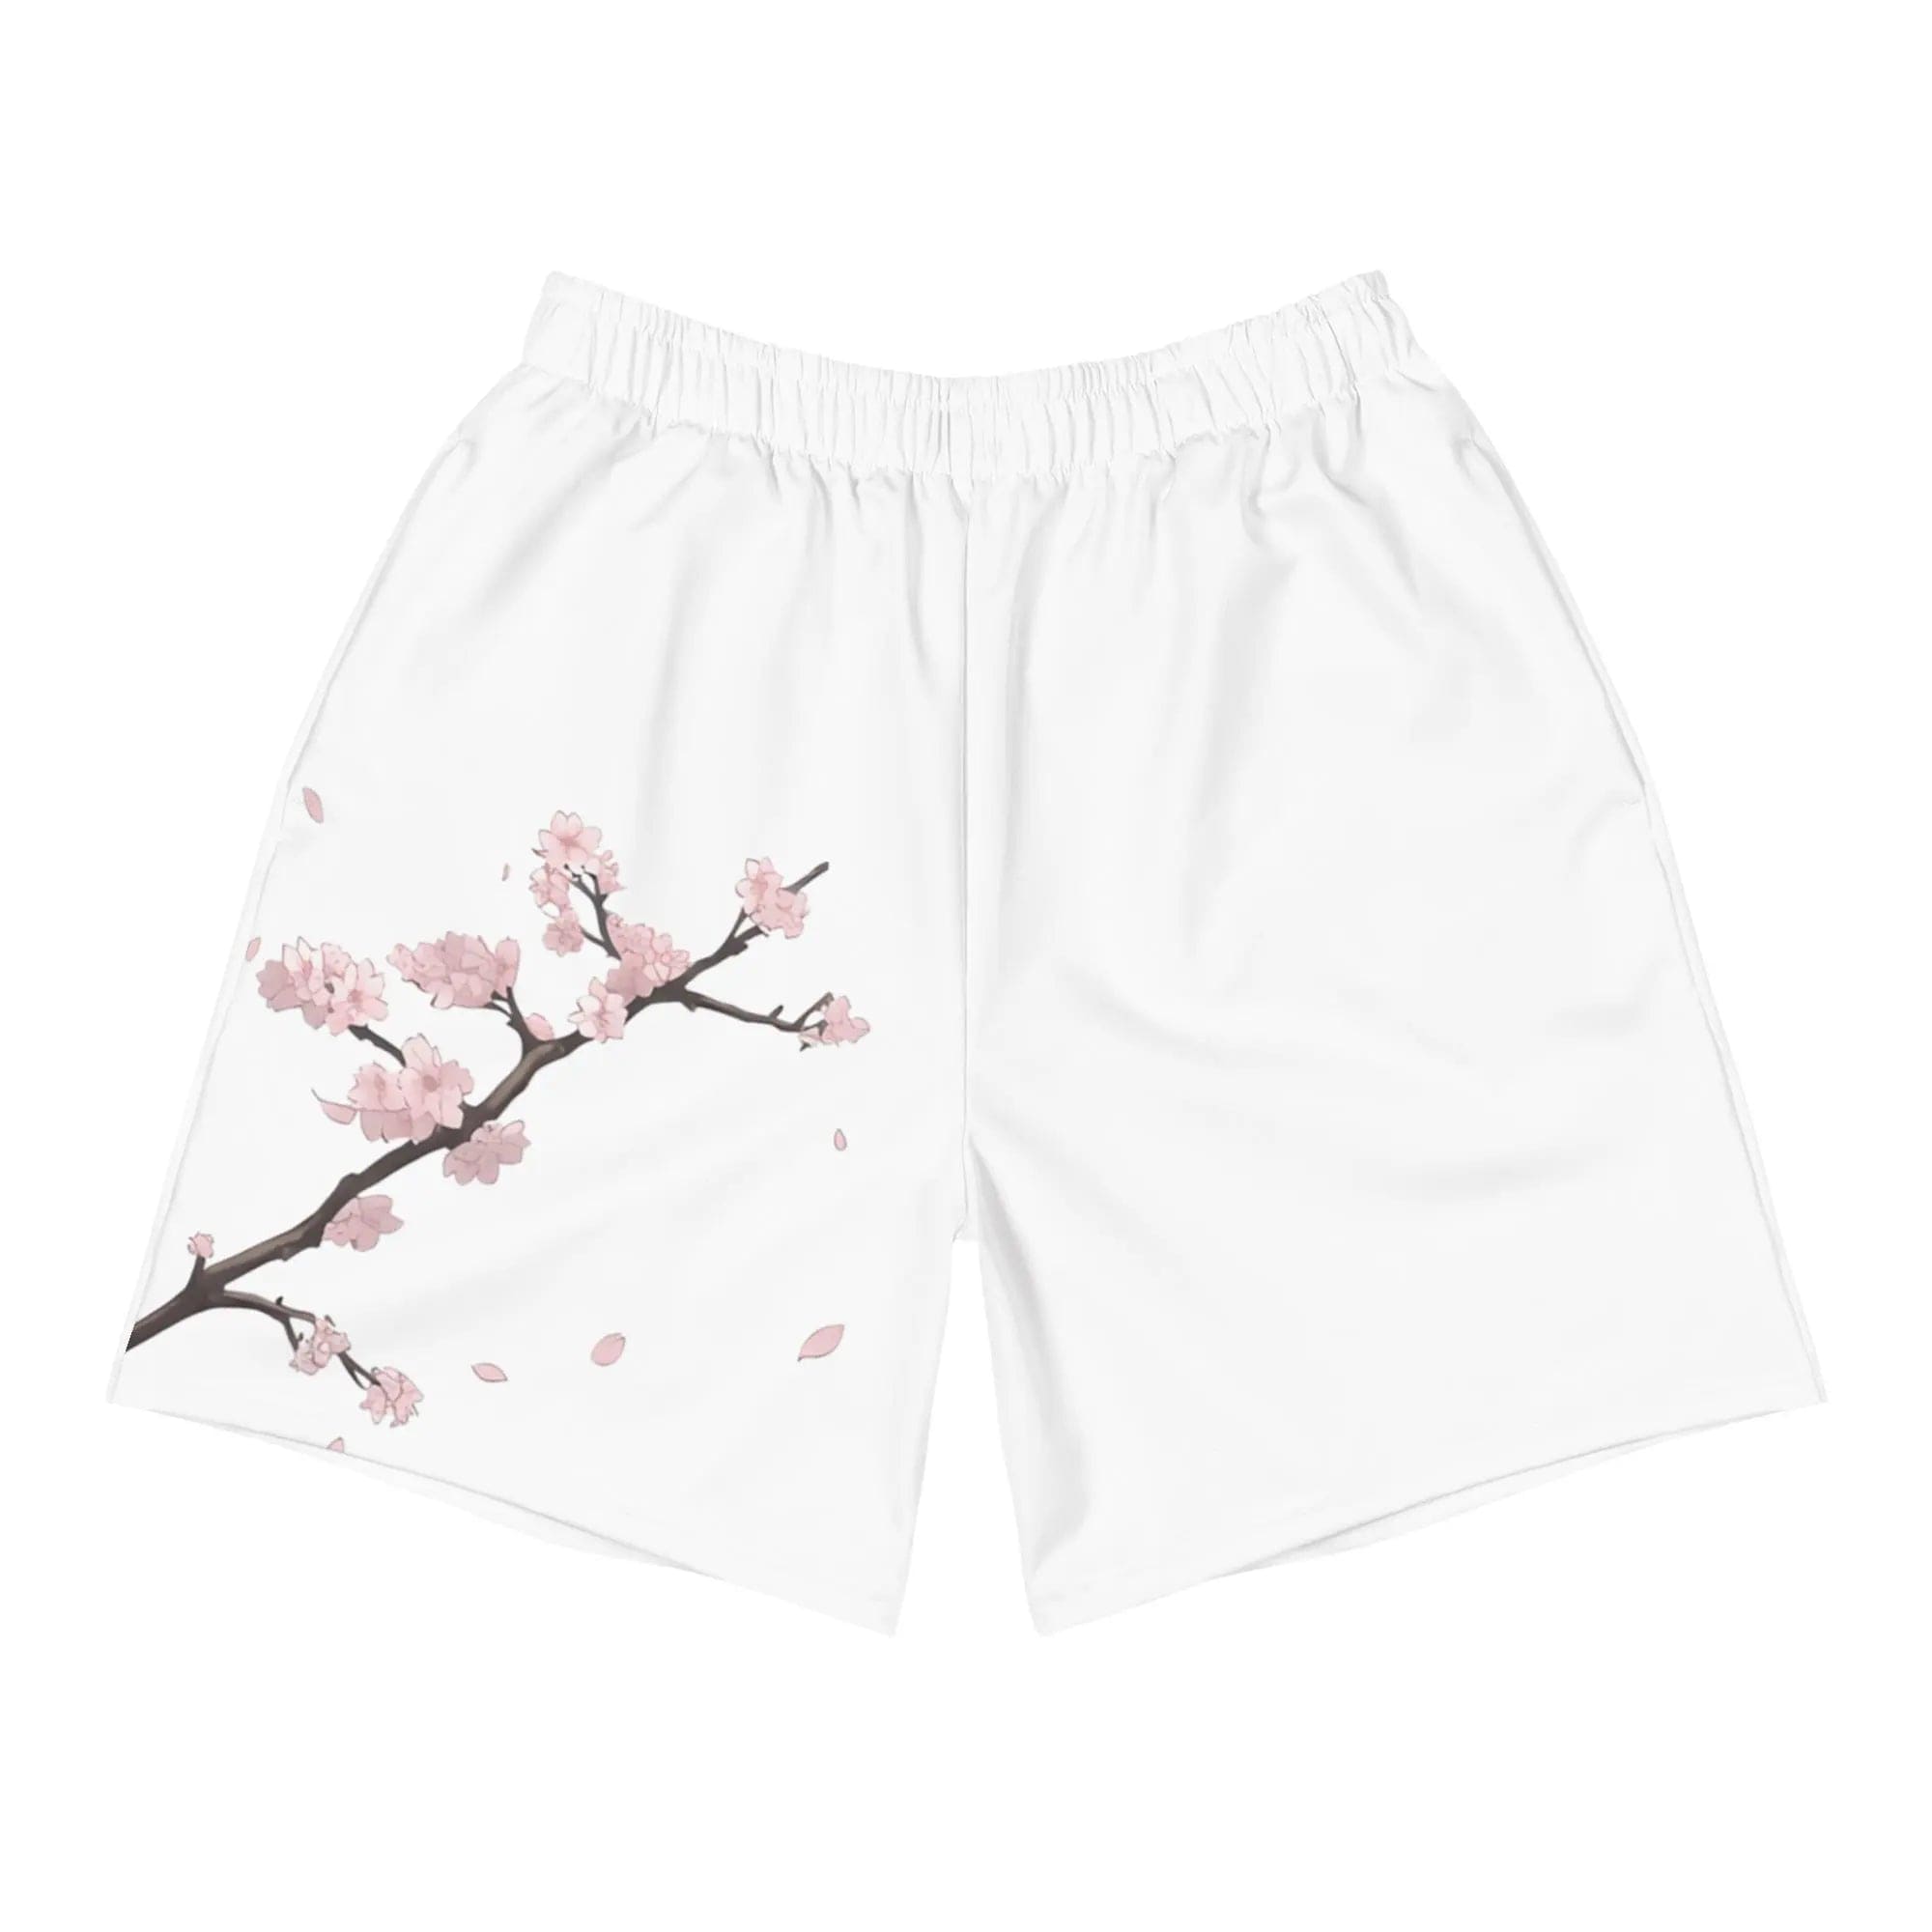 all-over-print-mens-recycled-athletic-shorts-white-front-6419b83701f5a-10373160.jpg